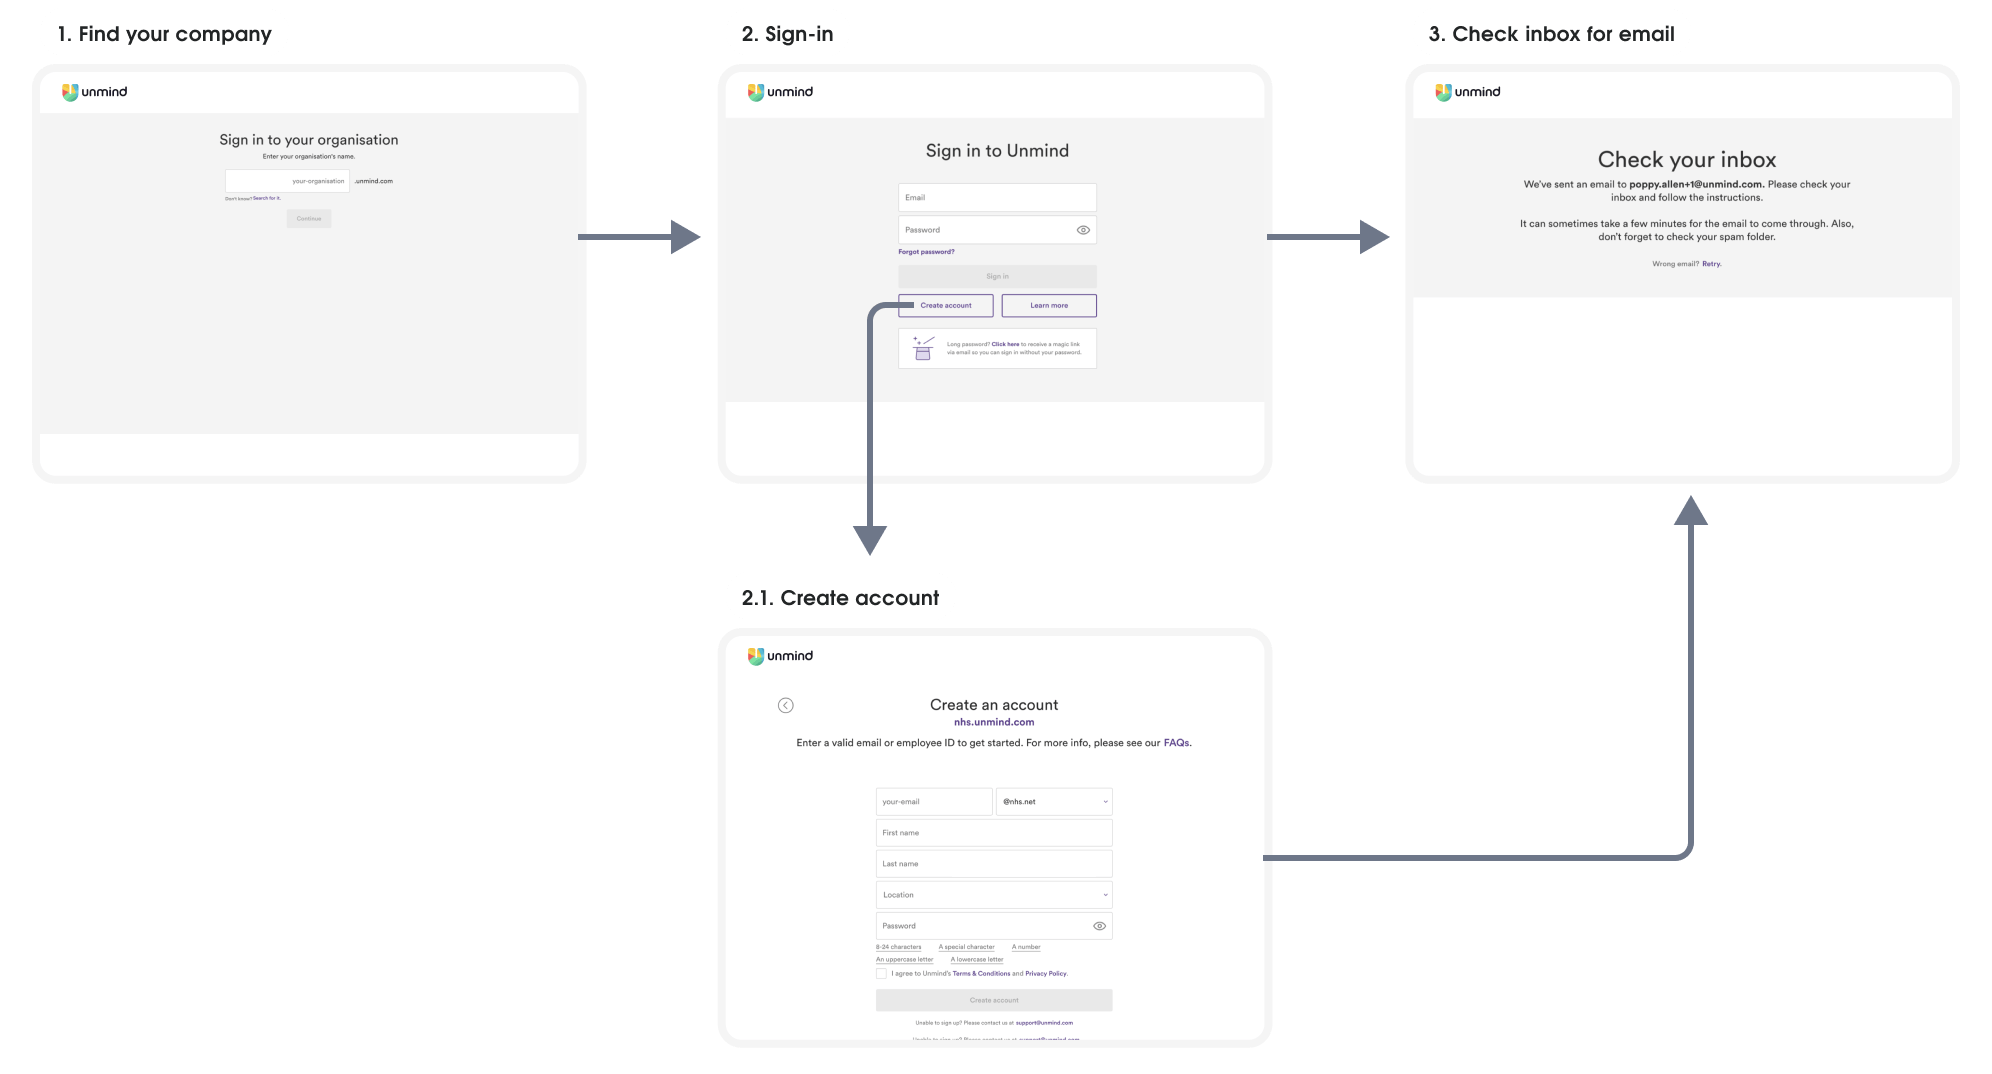 A very visually dull registration flow comprised of three steps. Step 1: 'Find your company'. Step 2: 'Sign-in'  Employees could also go to a 'create an account' screen from here. Step 3: 'Check your inbox'.